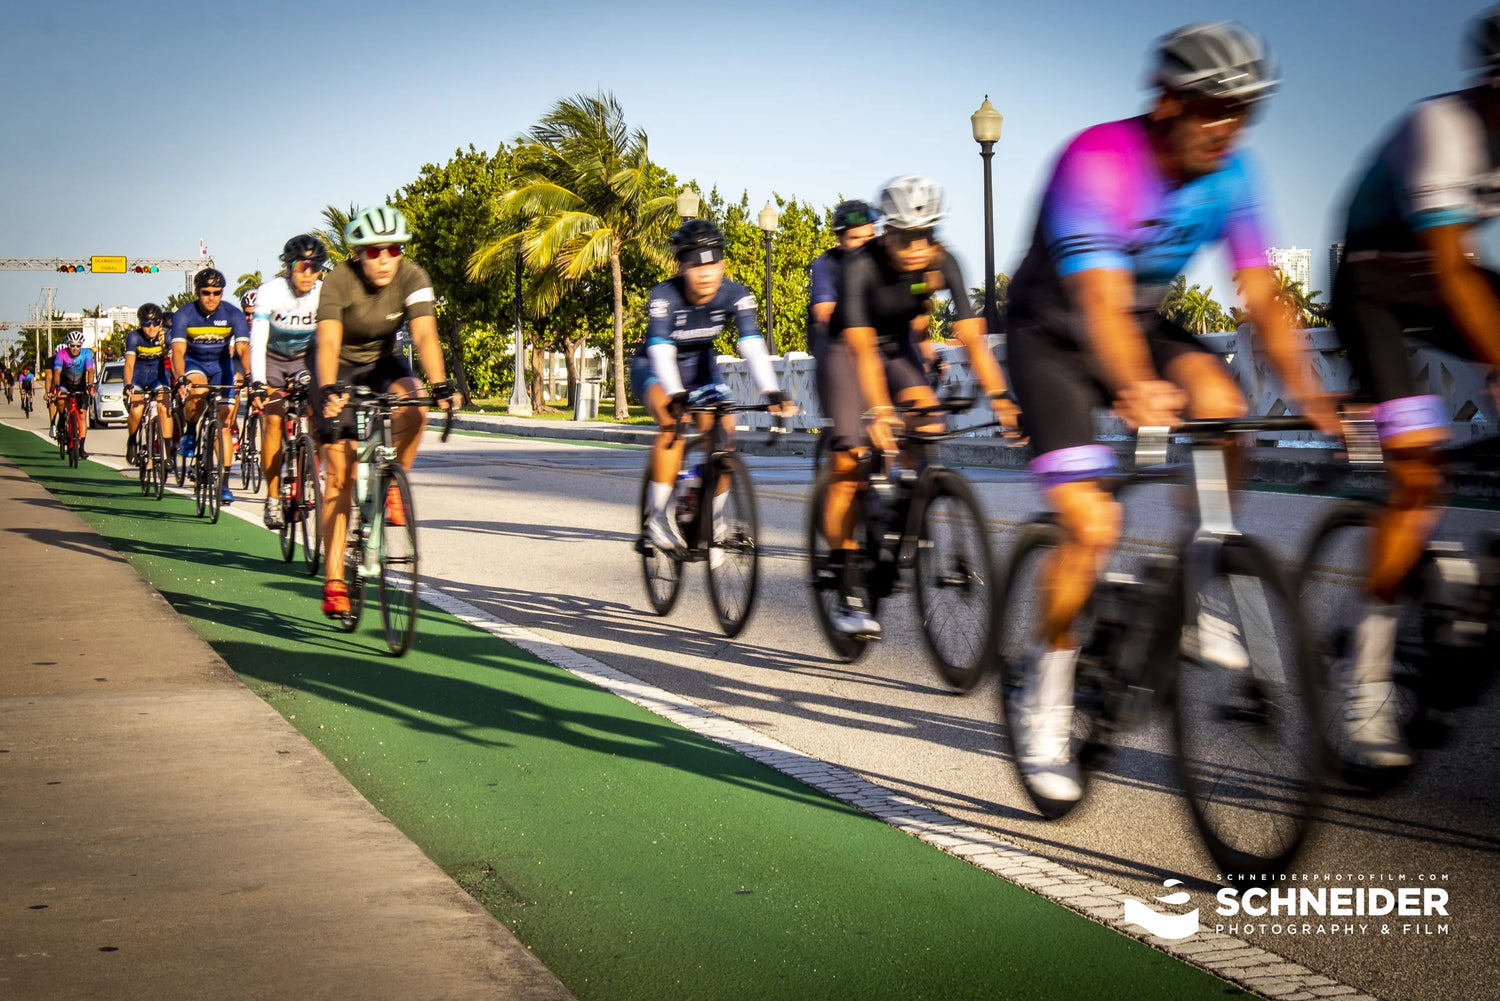 Upcoming Miami Bike Races & Cycling Events